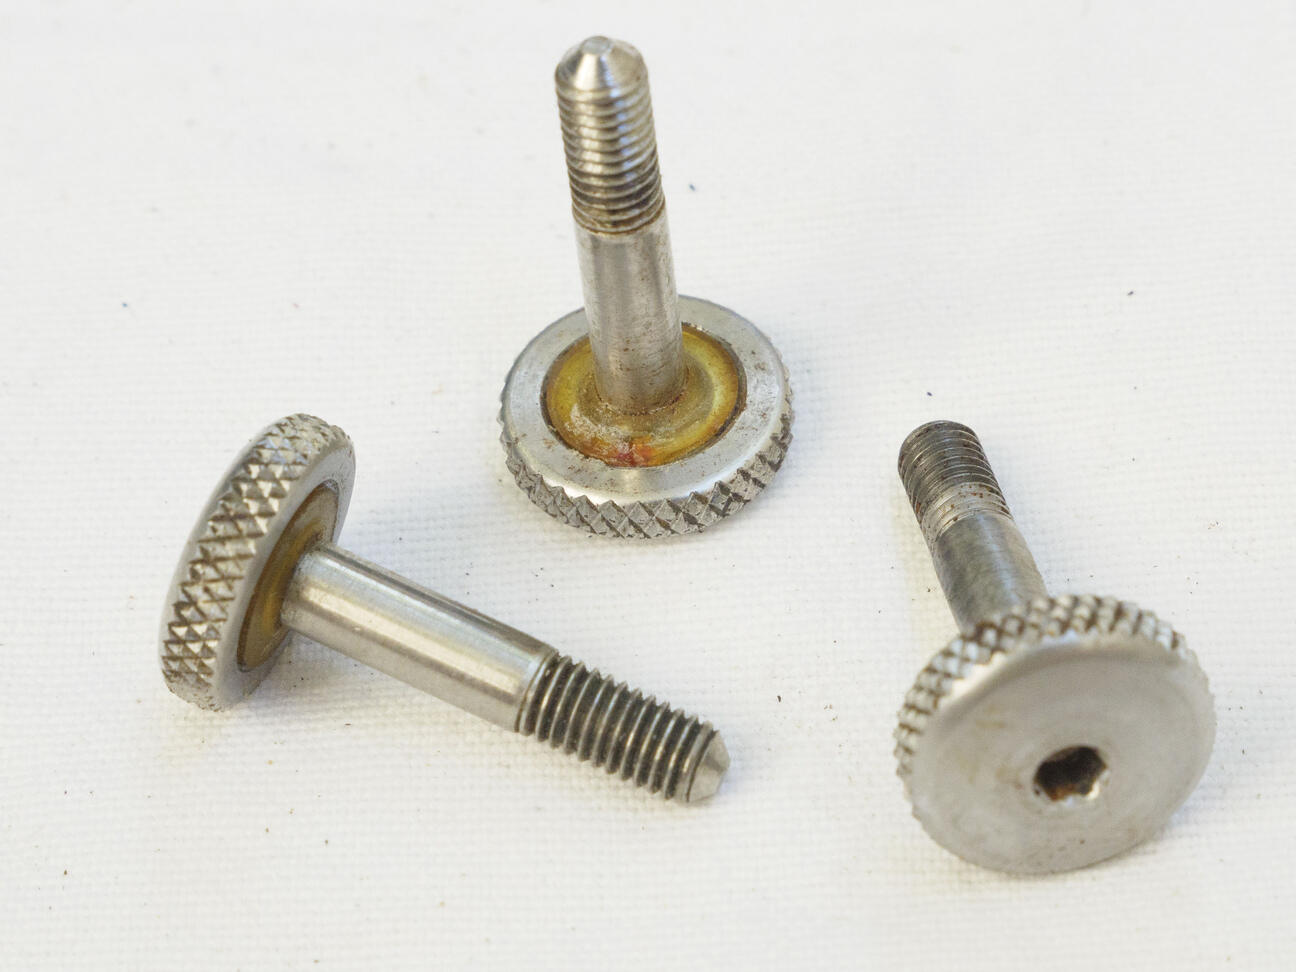 Modern Automag quickstrip screw, used with dirt or gunk in knurling.